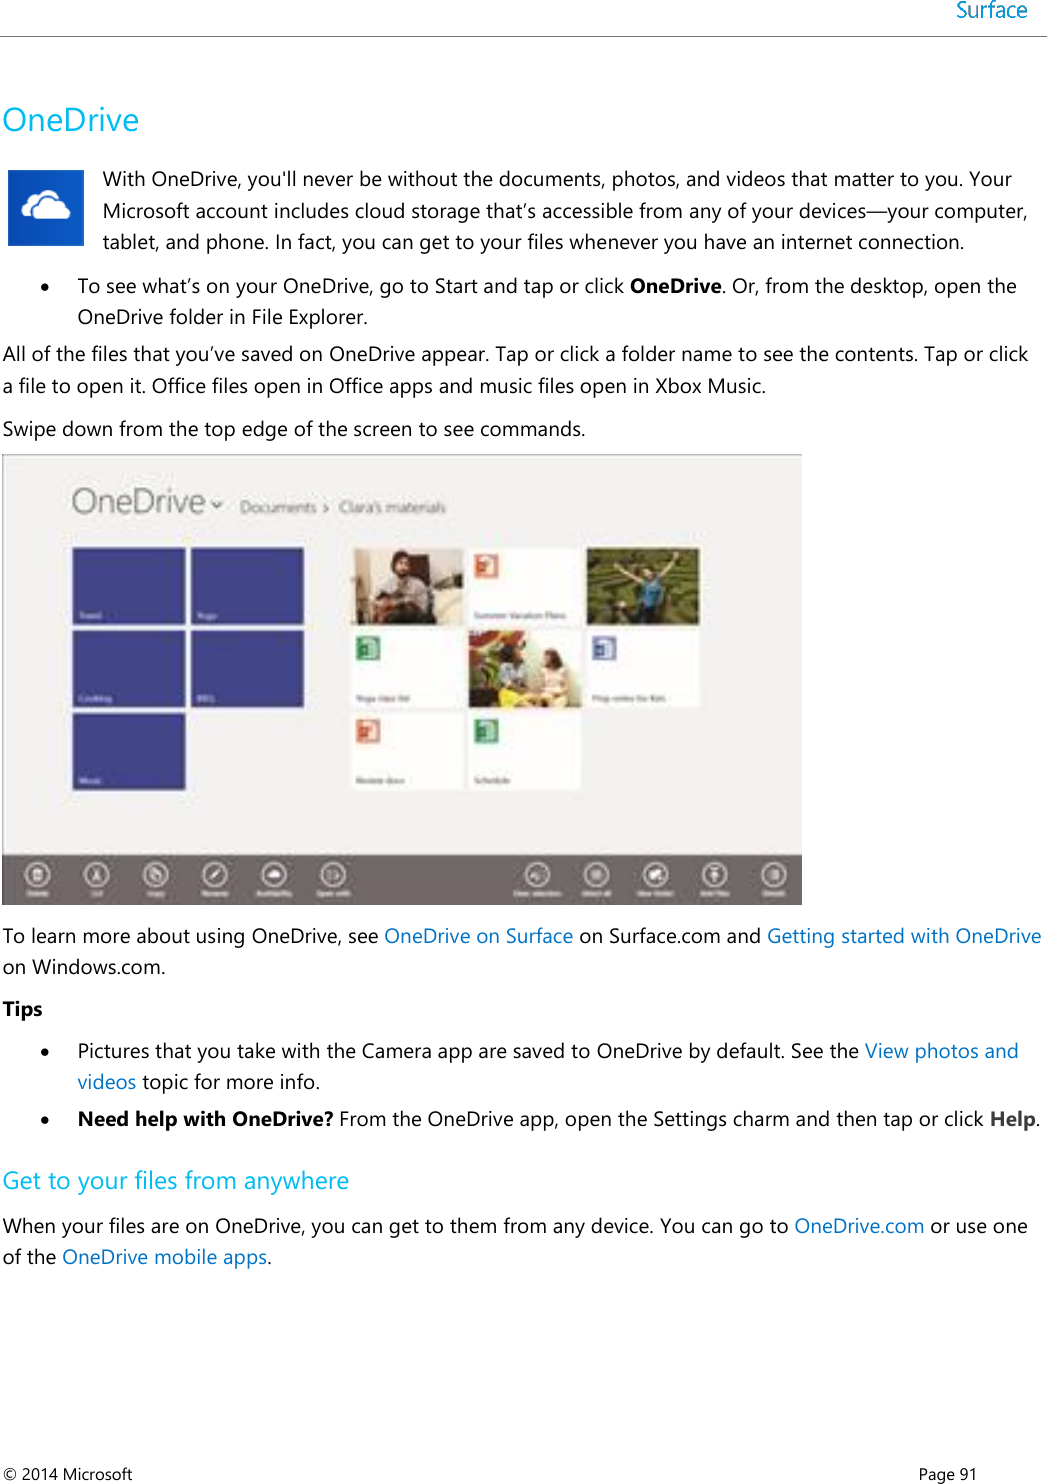  © 2014 Microsoft      Page 91  OneDrive With OneDrive, you&apos;ll never be without the documents, photos, and videos that matter to you. Your Microsoft account includes cloud storage that’s accessible from any of your devices—your computer, tablet, and phone. In fact, you can get to your files whenever you have an internet connection.   To see what’s on your OneDrive, go to Start and tap or click OneDrive. Or, from the desktop, open the OneDrive folder in File Explorer. All of the files that you’ve saved on OneDrive appear. Tap or click a folder name to see the contents. Tap or click a file to open it. Office files open in Office apps and music files open in Xbox Music.  Swipe down from the top edge of the screen to see commands.    To learn more about using OneDrive, see OneDrive on Surface on Surface.com and Getting started with OneDrive on Windows.com.  Tips  Pictures that you take with the Camera app are saved to OneDrive by default. See the View photos and videos topic for more info.  Need help with OneDrive? From the OneDrive app, open the Settings charm and then tap or click Help. Get to your files from anywhere  When your files are on OneDrive, you can get to them from any device. You can go to OneDrive.com or use one of the OneDrive mobile apps.  